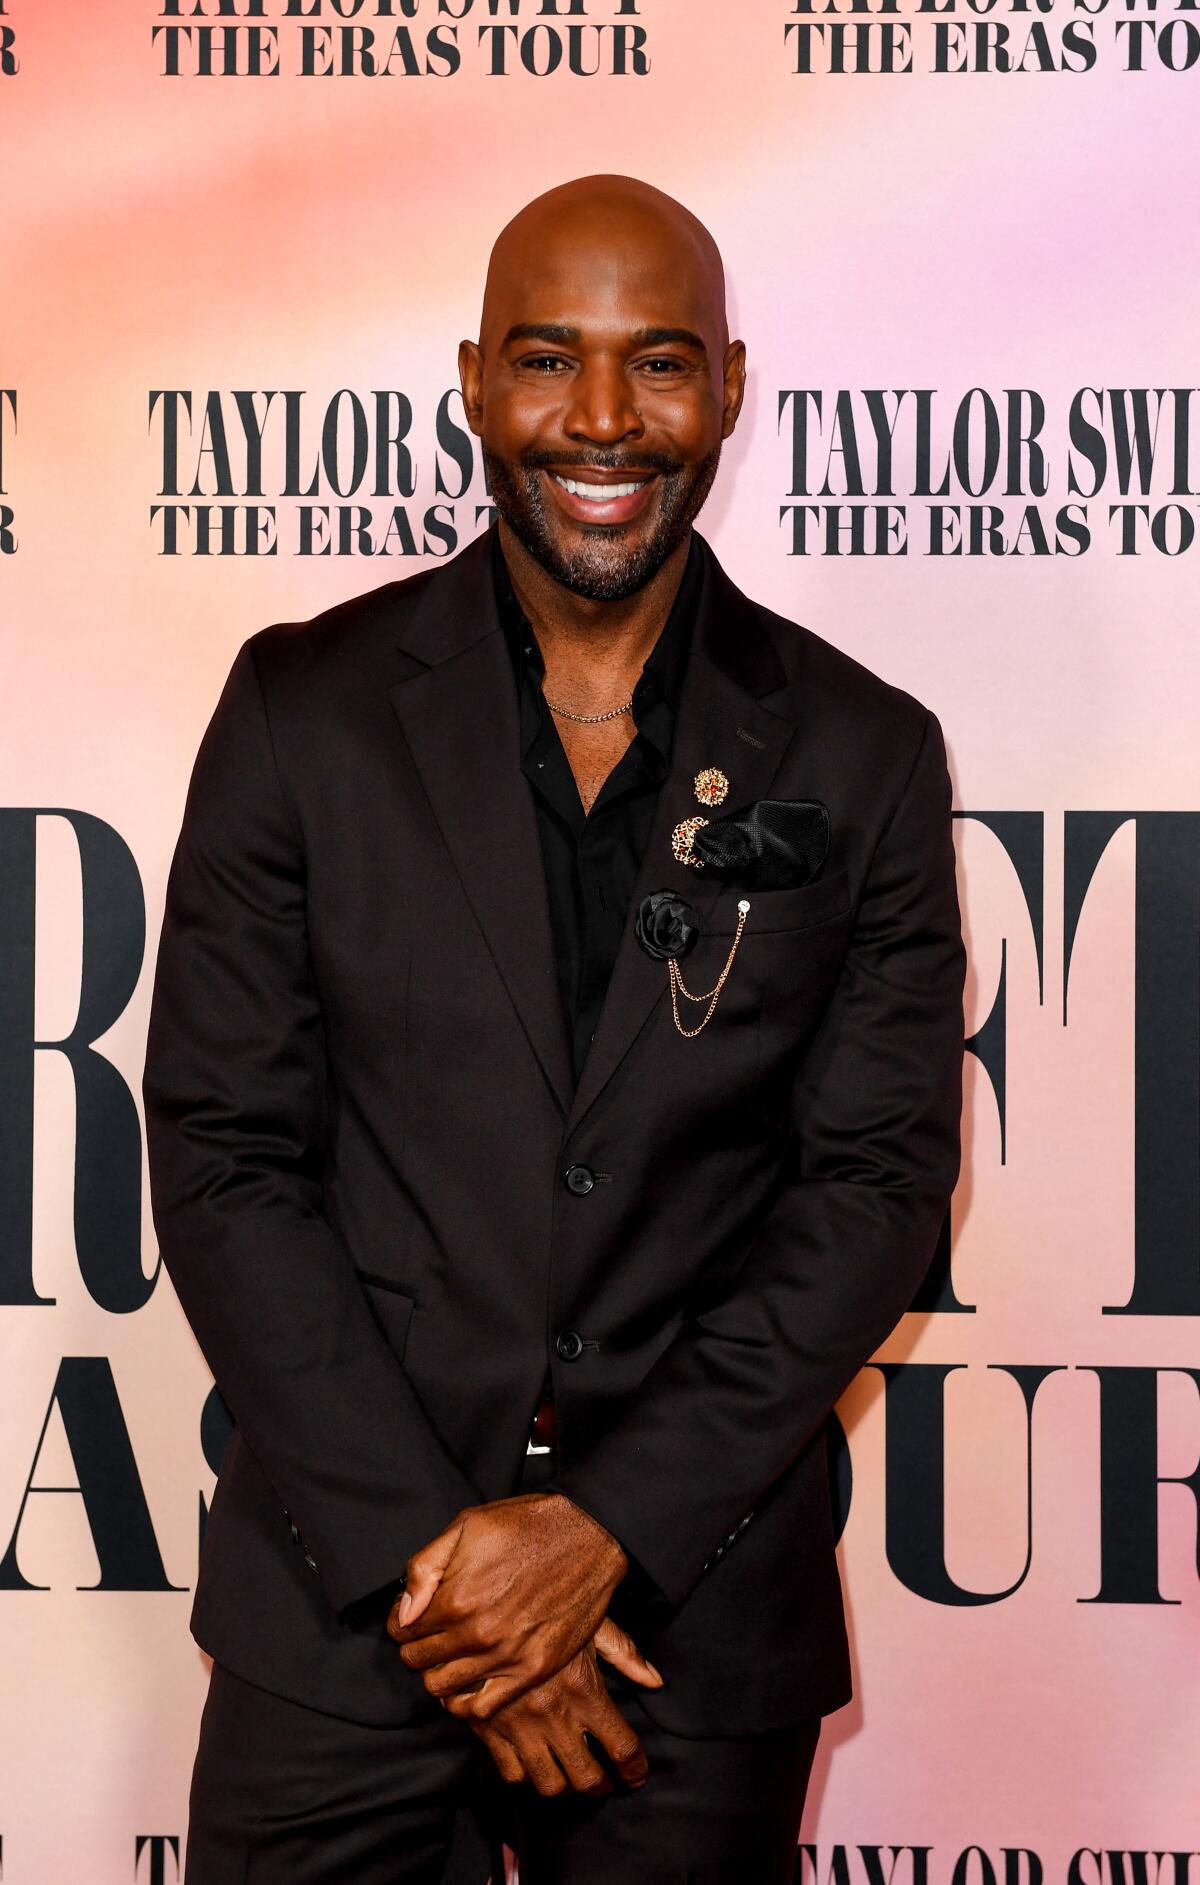 Karamo Brown, in a black suit and open-collar shirt, stands with his hands crossed in front of him